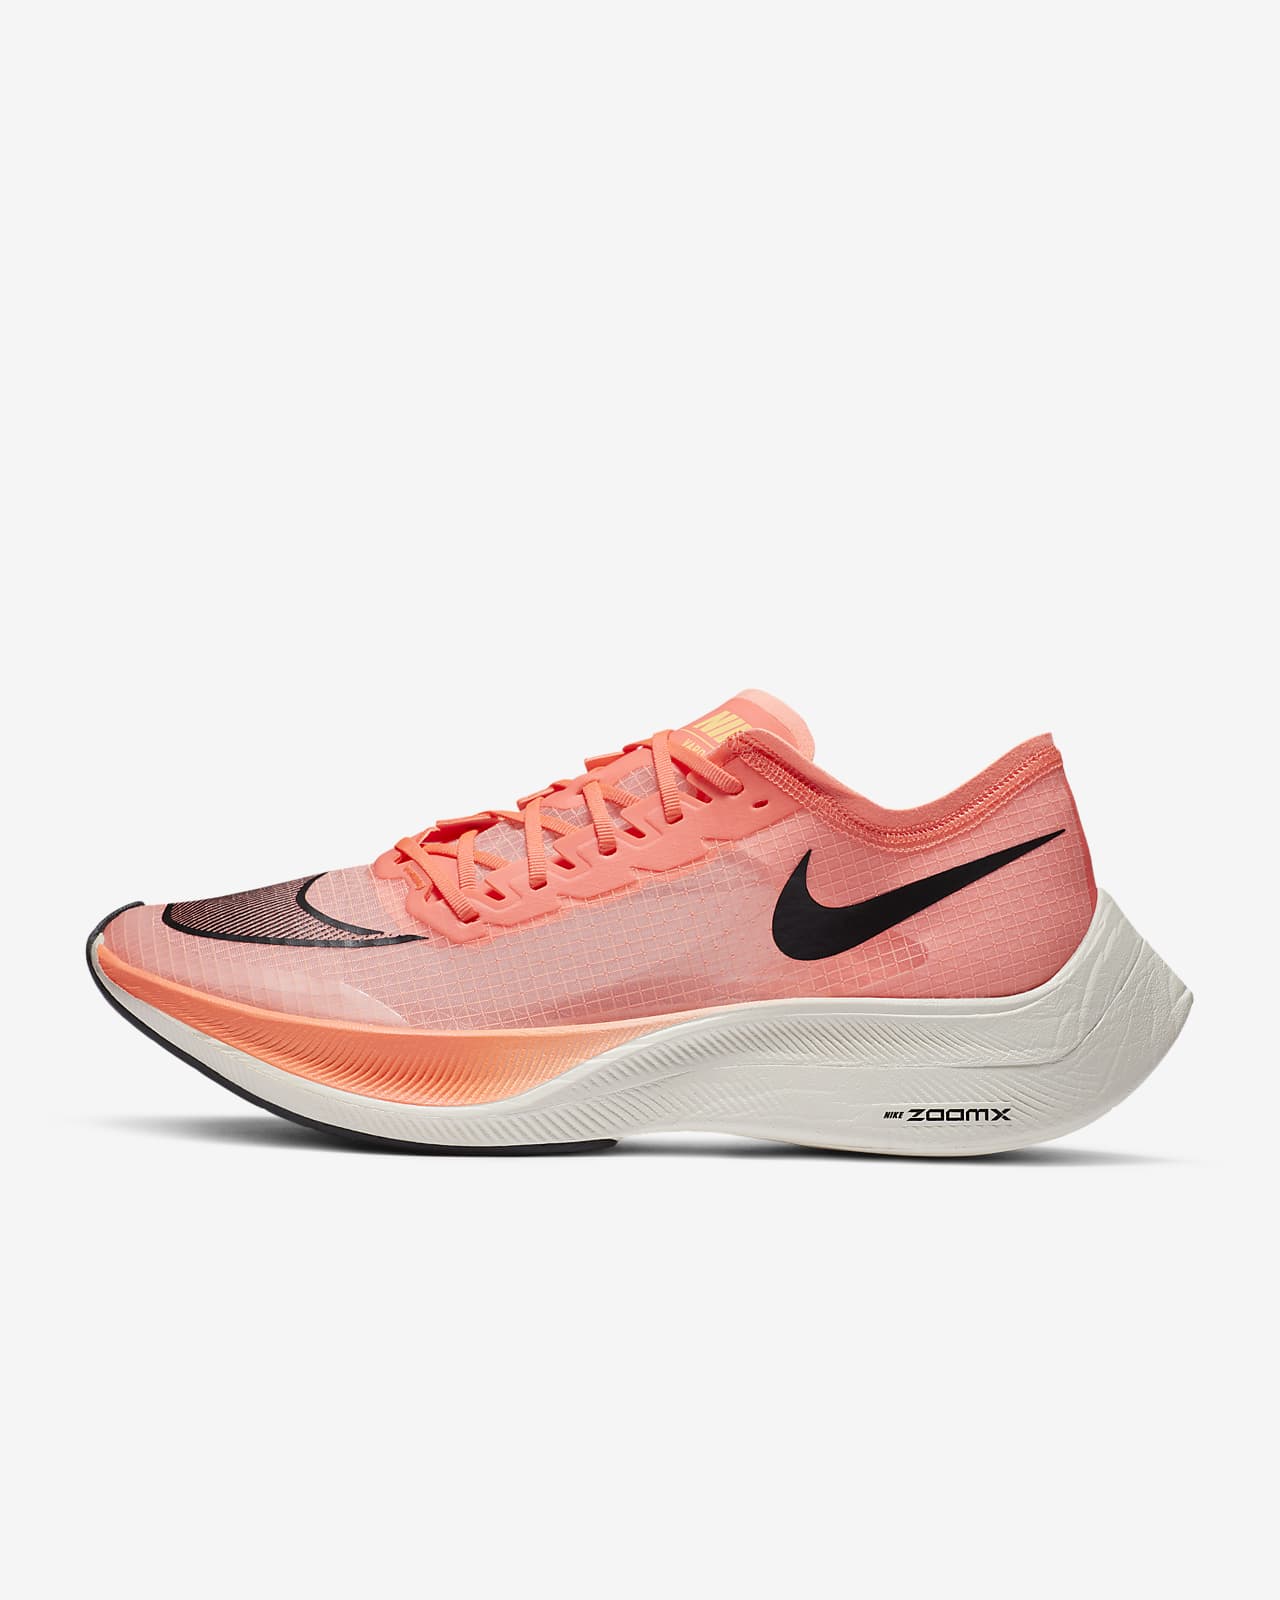 nike vaporfly sold out